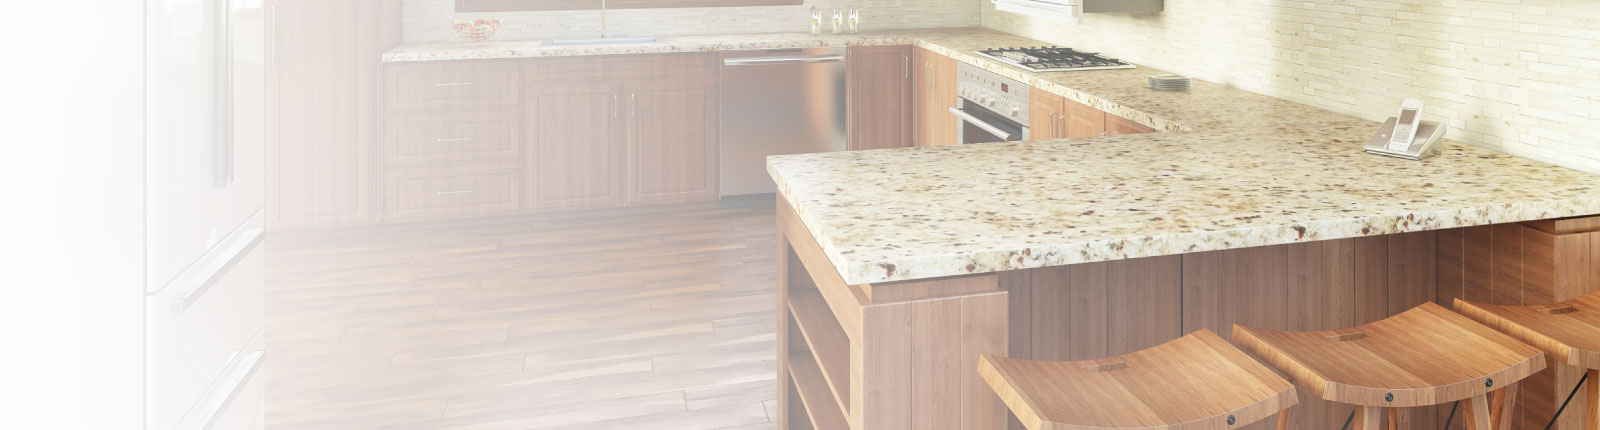 brown flooring and granite countertops in a kitchen